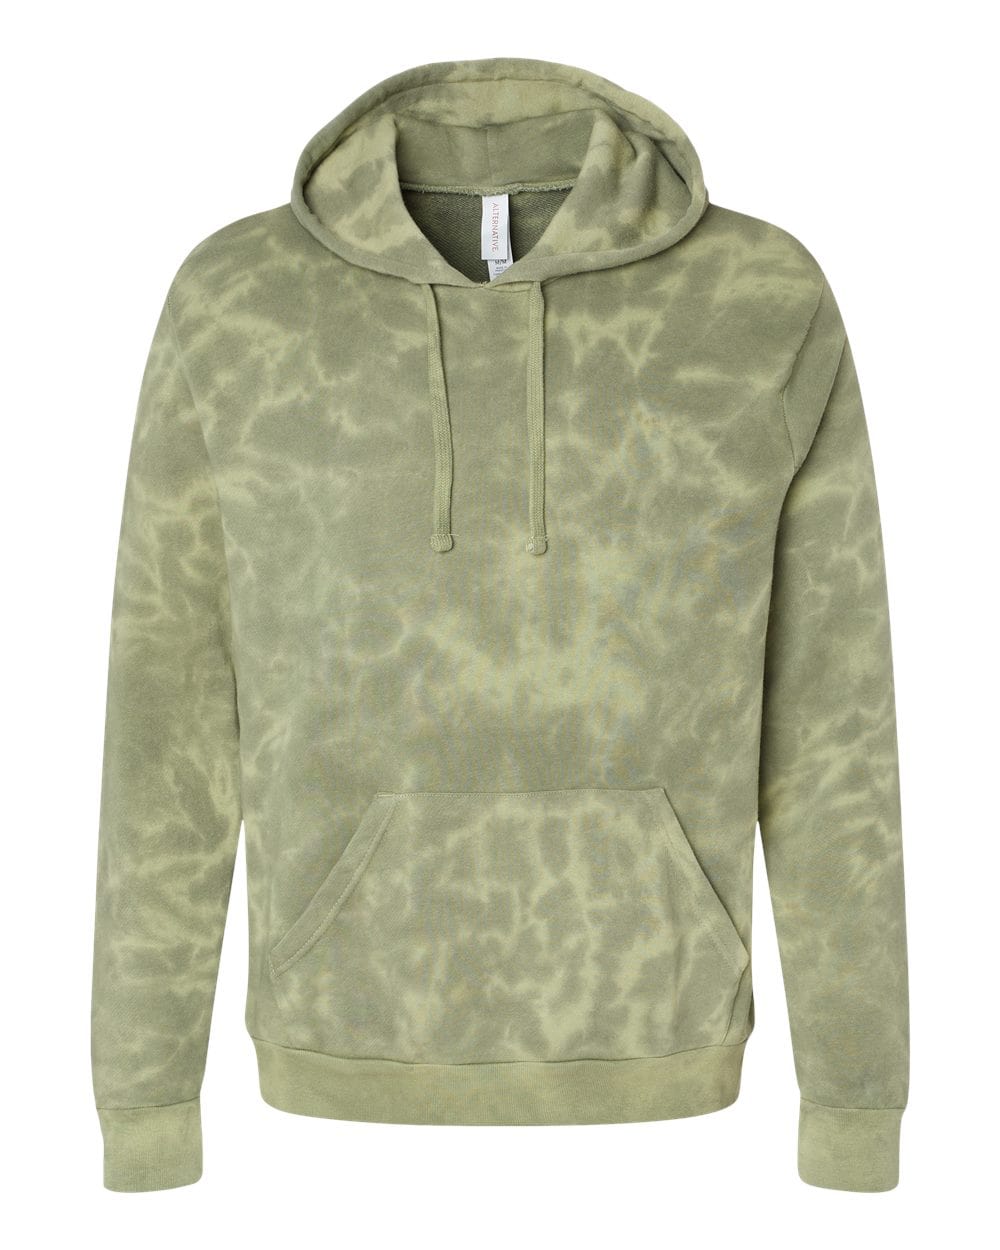 Alternative Sweatshirts XS / Olive Tonal Tie-Dye Alternative - Challenger Lightweight Eco-Washed French Terry Tie-Dye Hooded Pullover